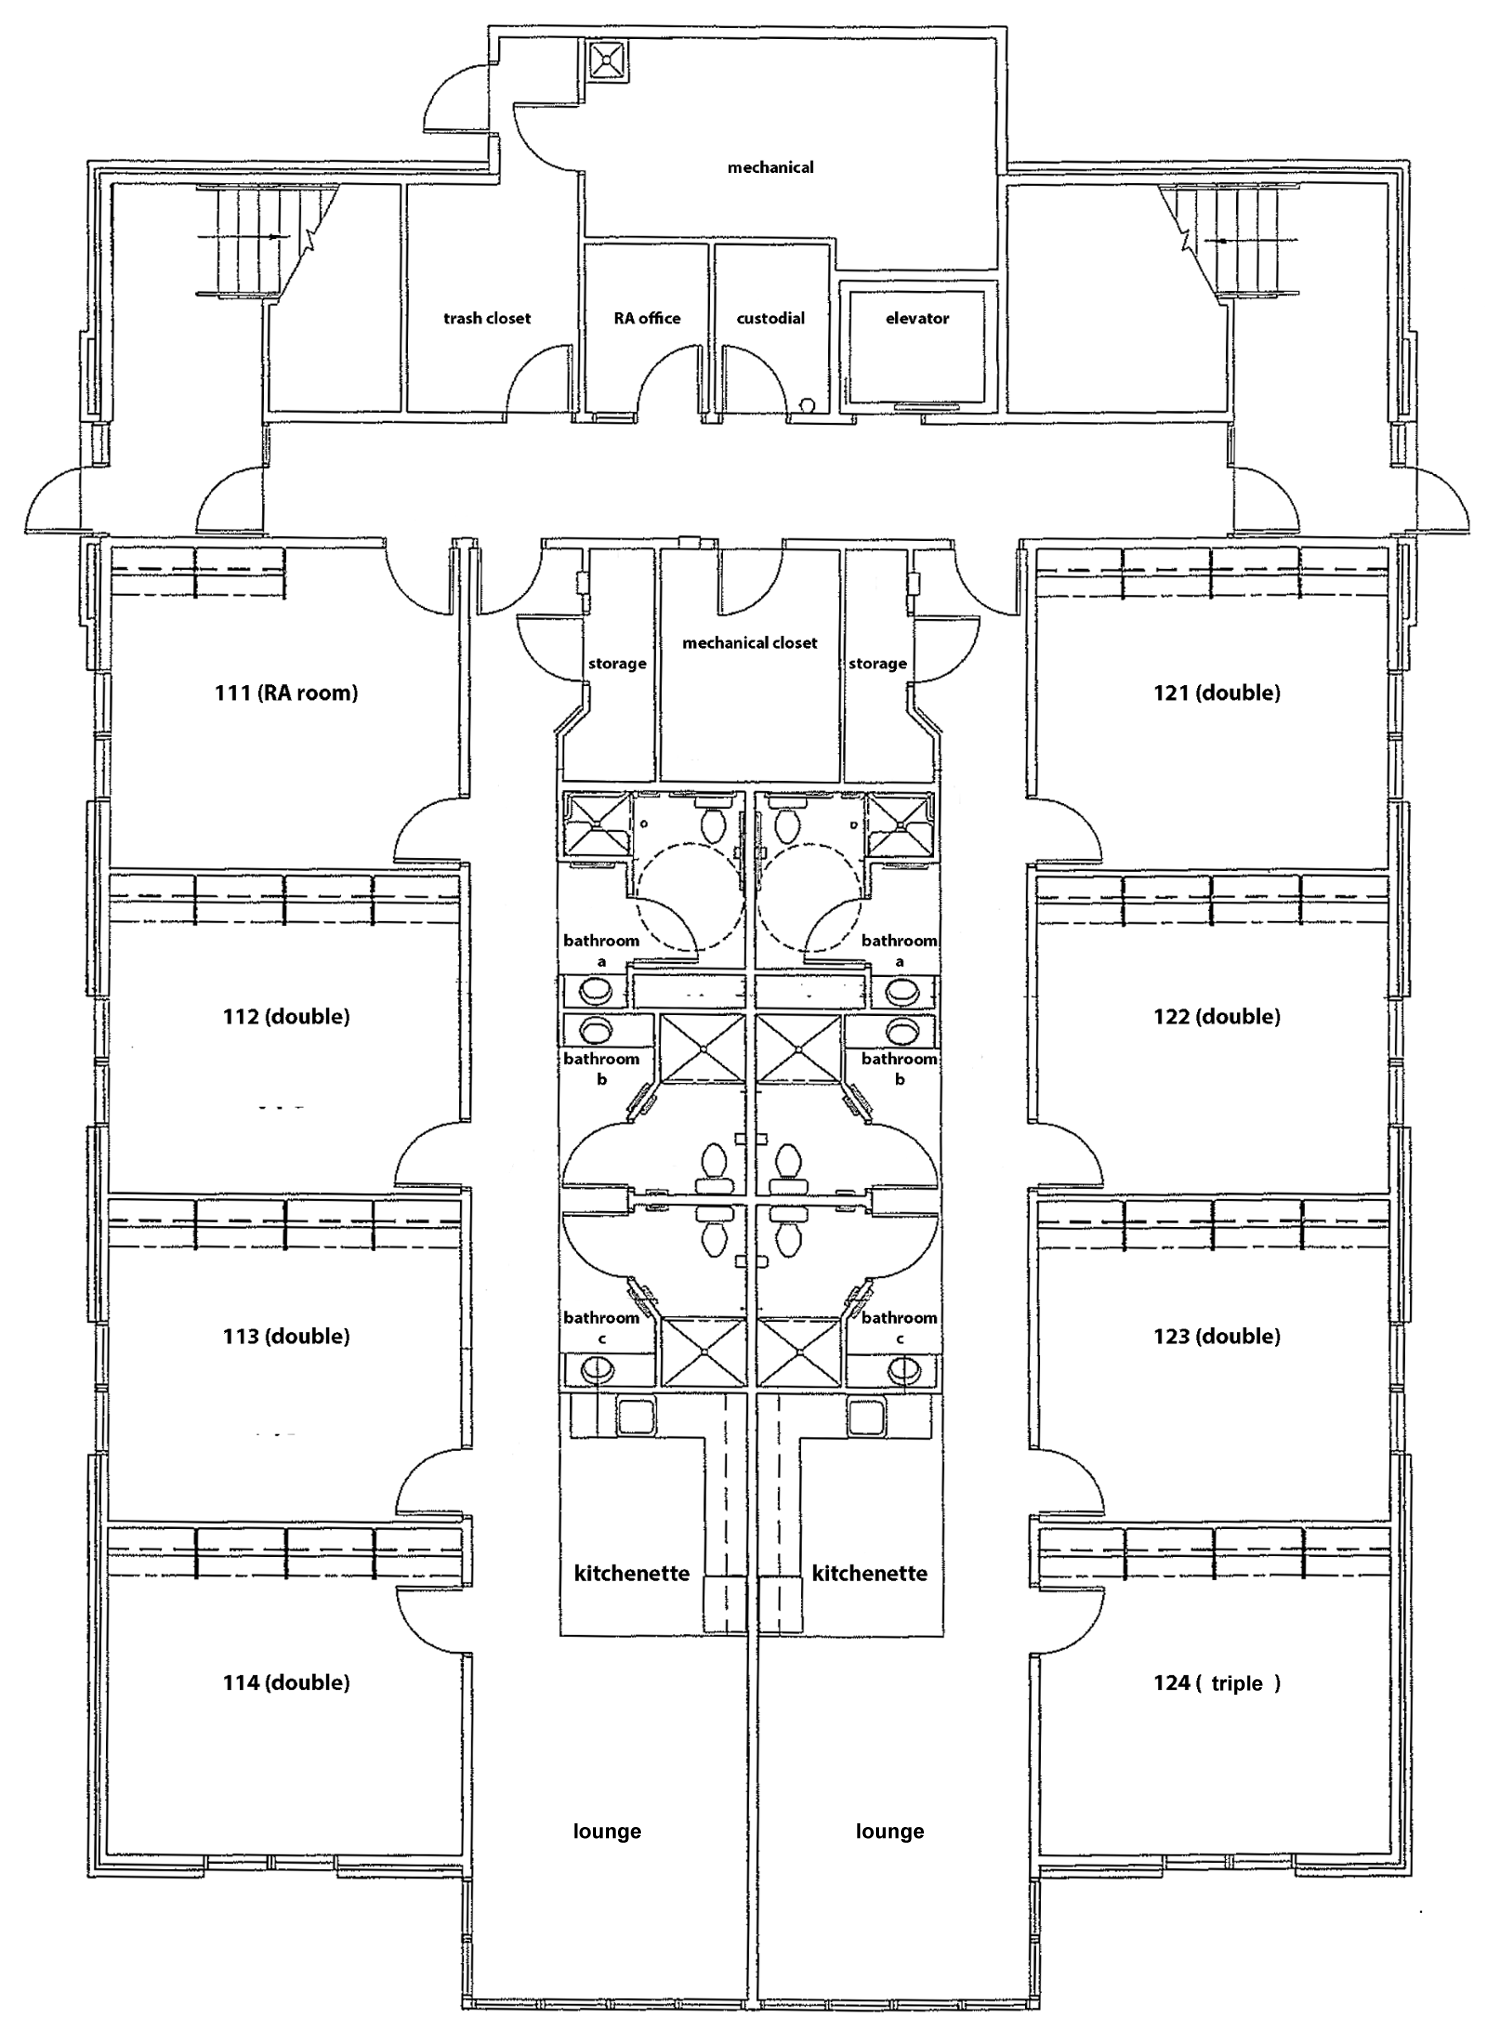 Ford hall smith college floor plan #5